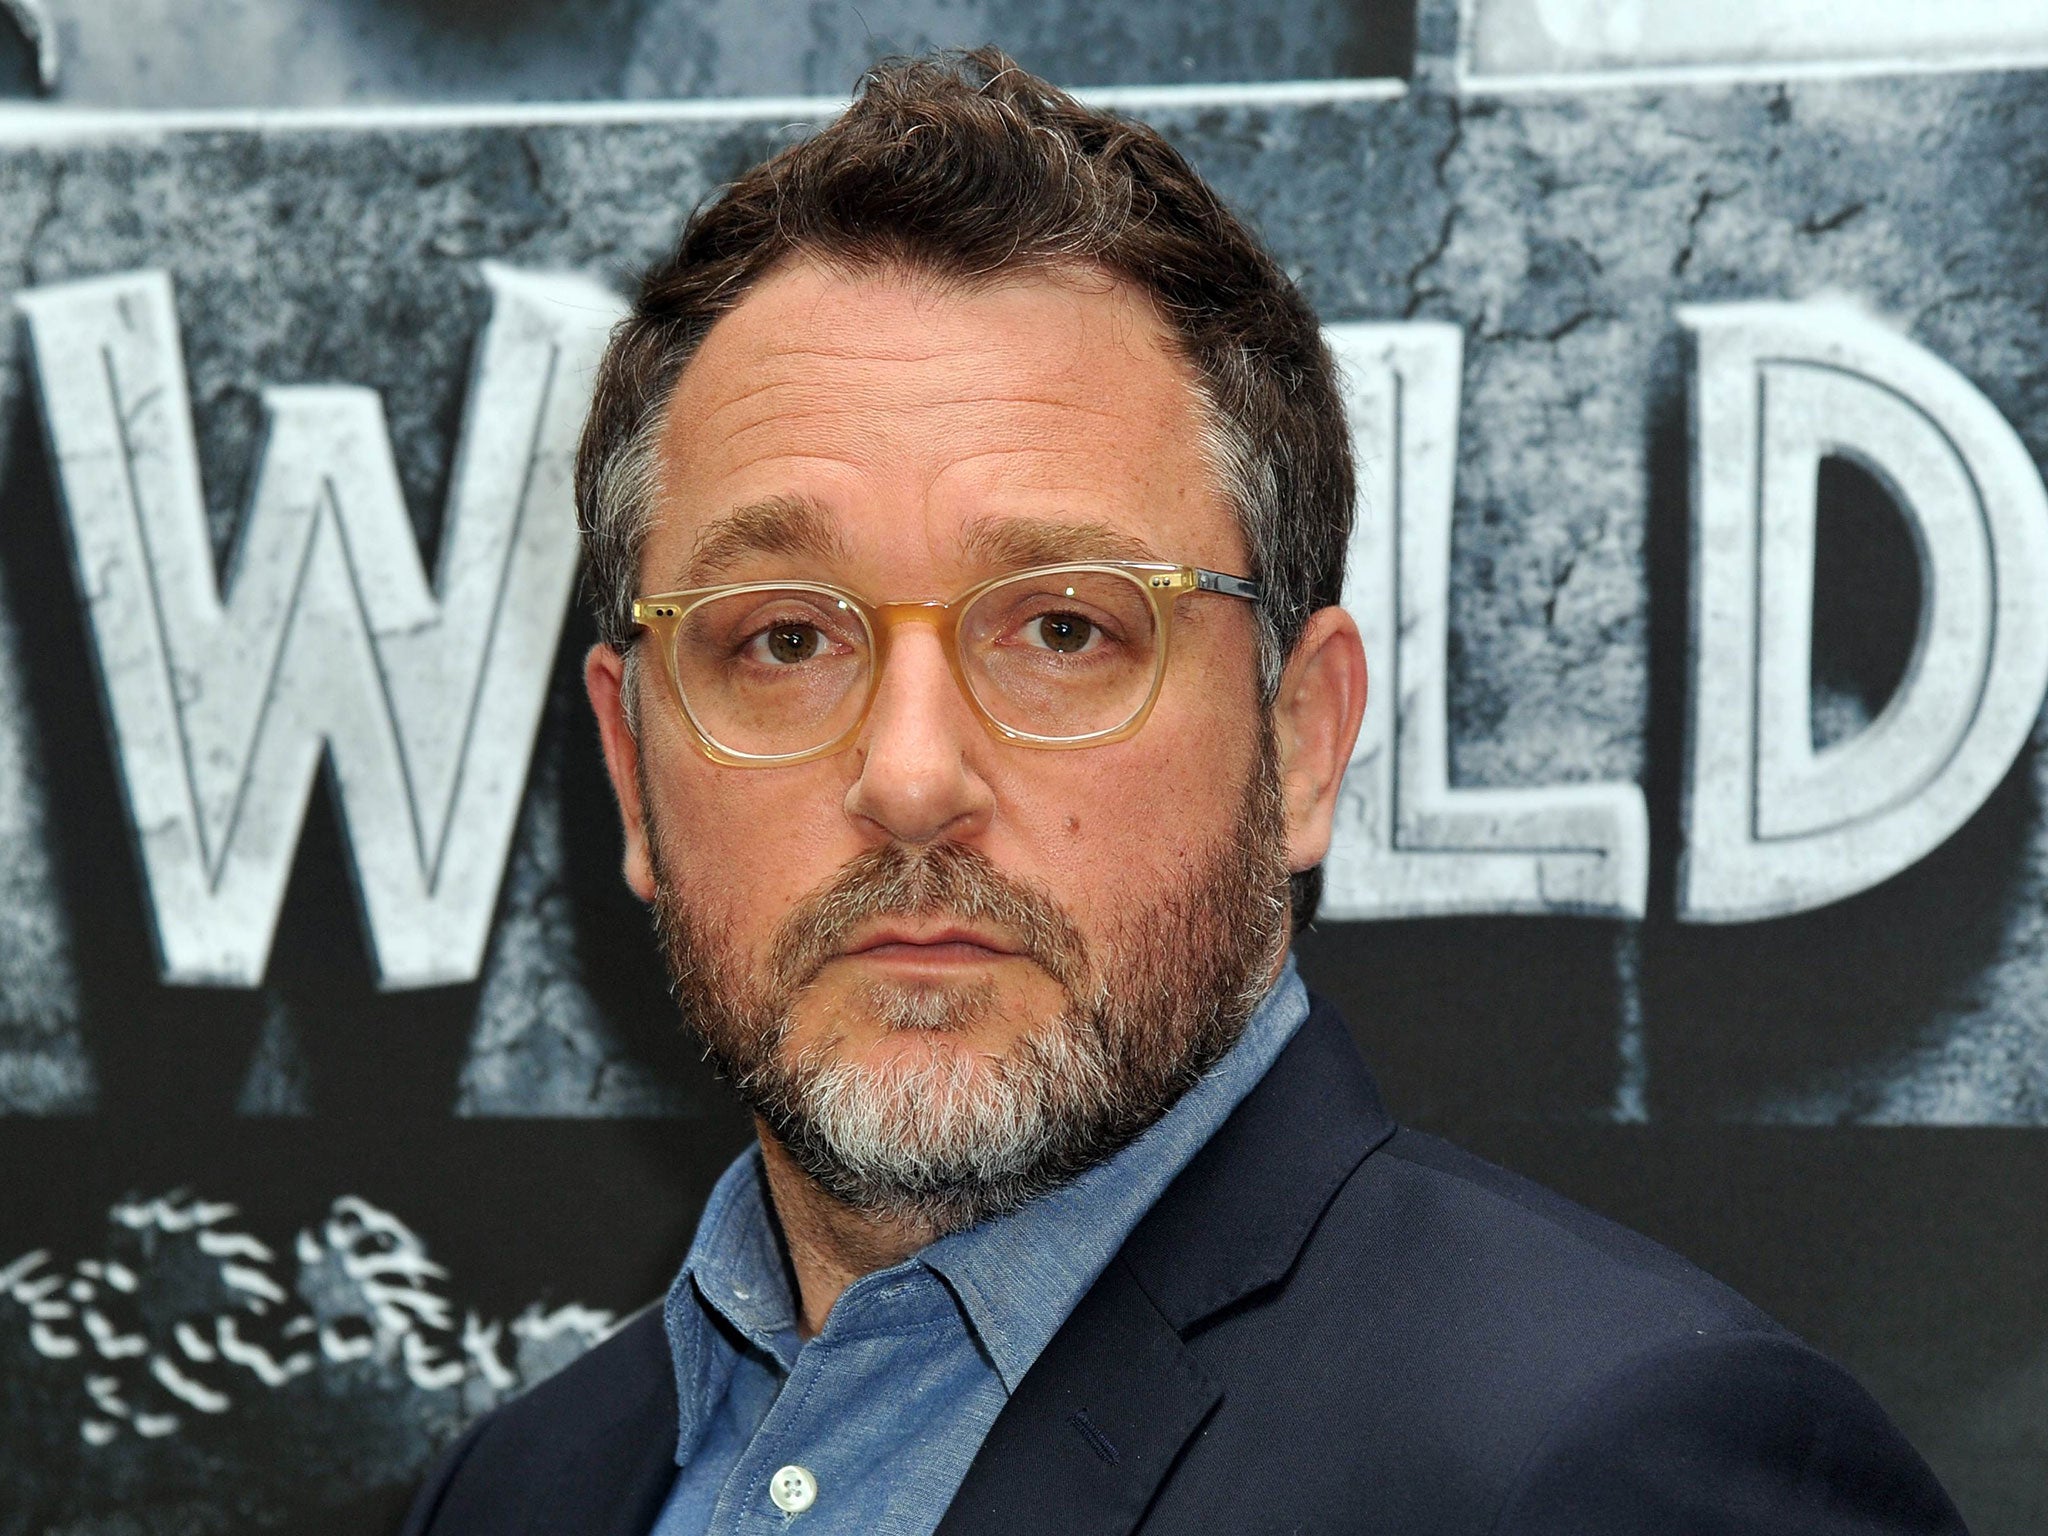 Jurassic World director Colin Trevorrow claims trailers are ruining films for cinema-goers